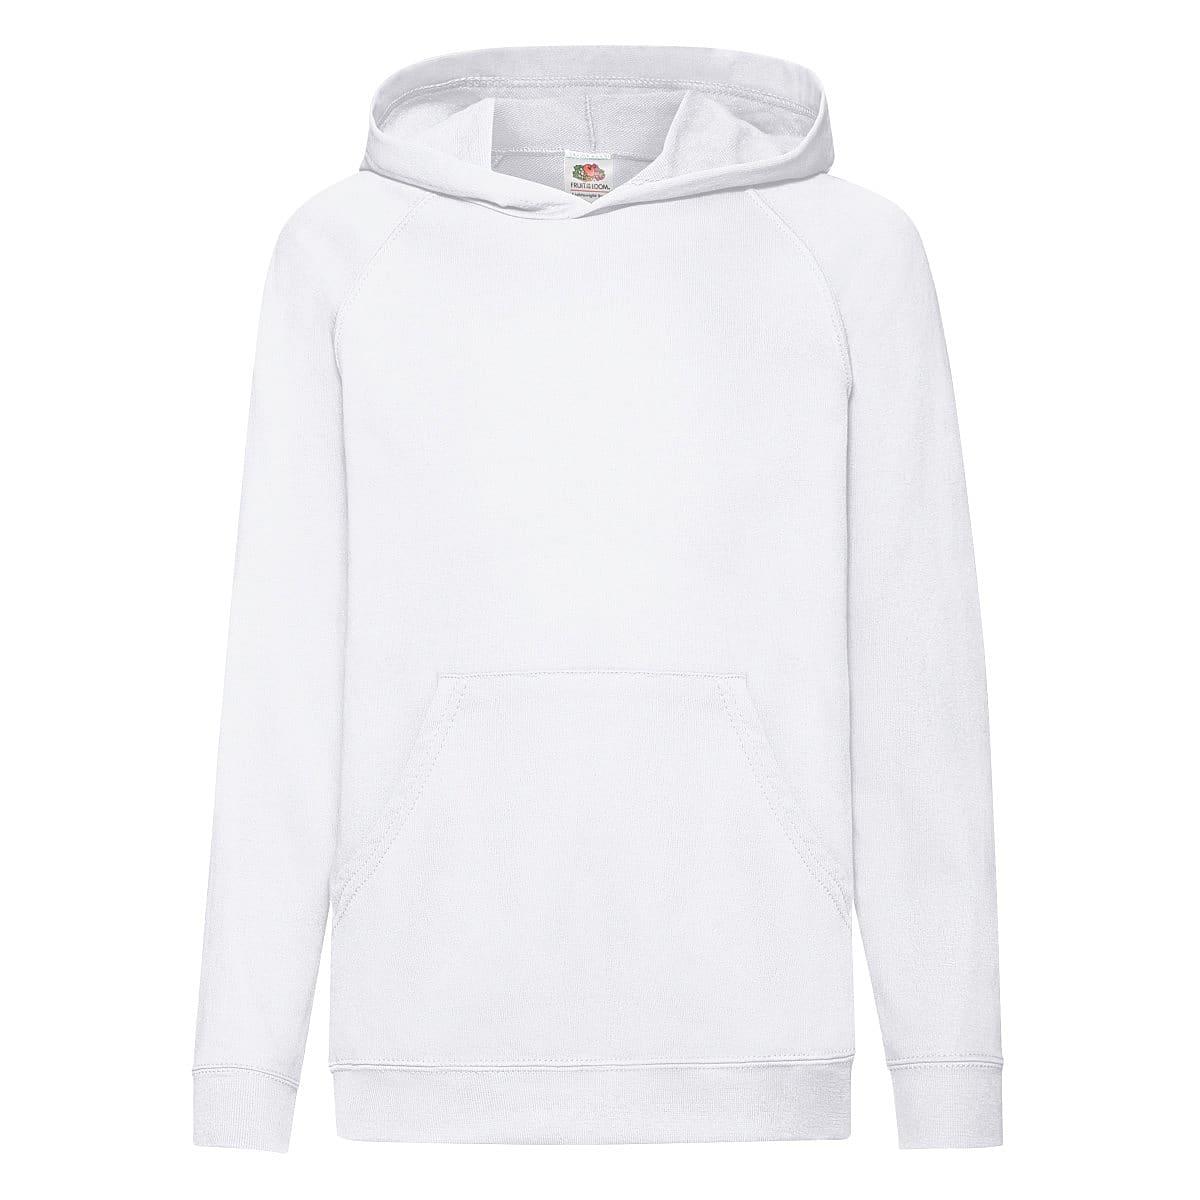 Fruit Of The Loom Kids Lightweight Hoodie in White (Product Code: 62009)